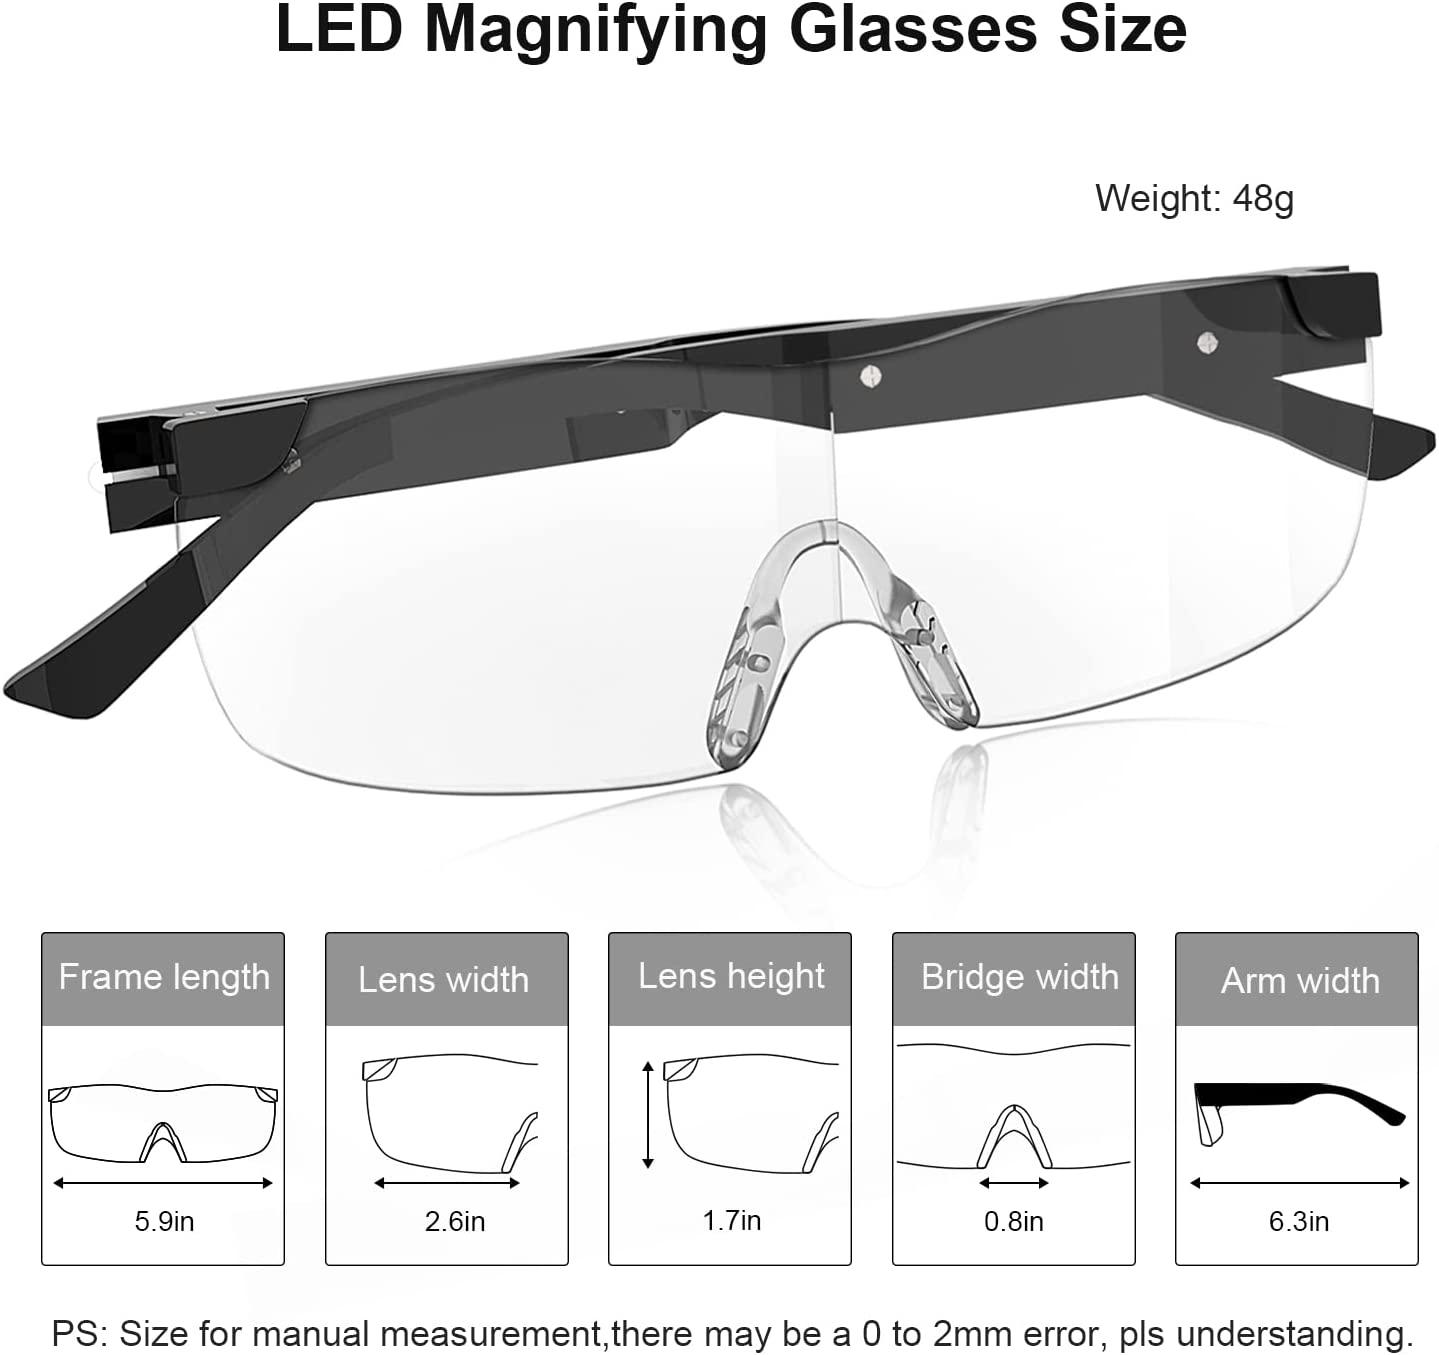 SKYWAY Magnifying Glasses with Light, 200% LED Lighted Rechargeable  Magnifier Eyeglasses for Reading Hobbies and Close Work Hands Free Black200